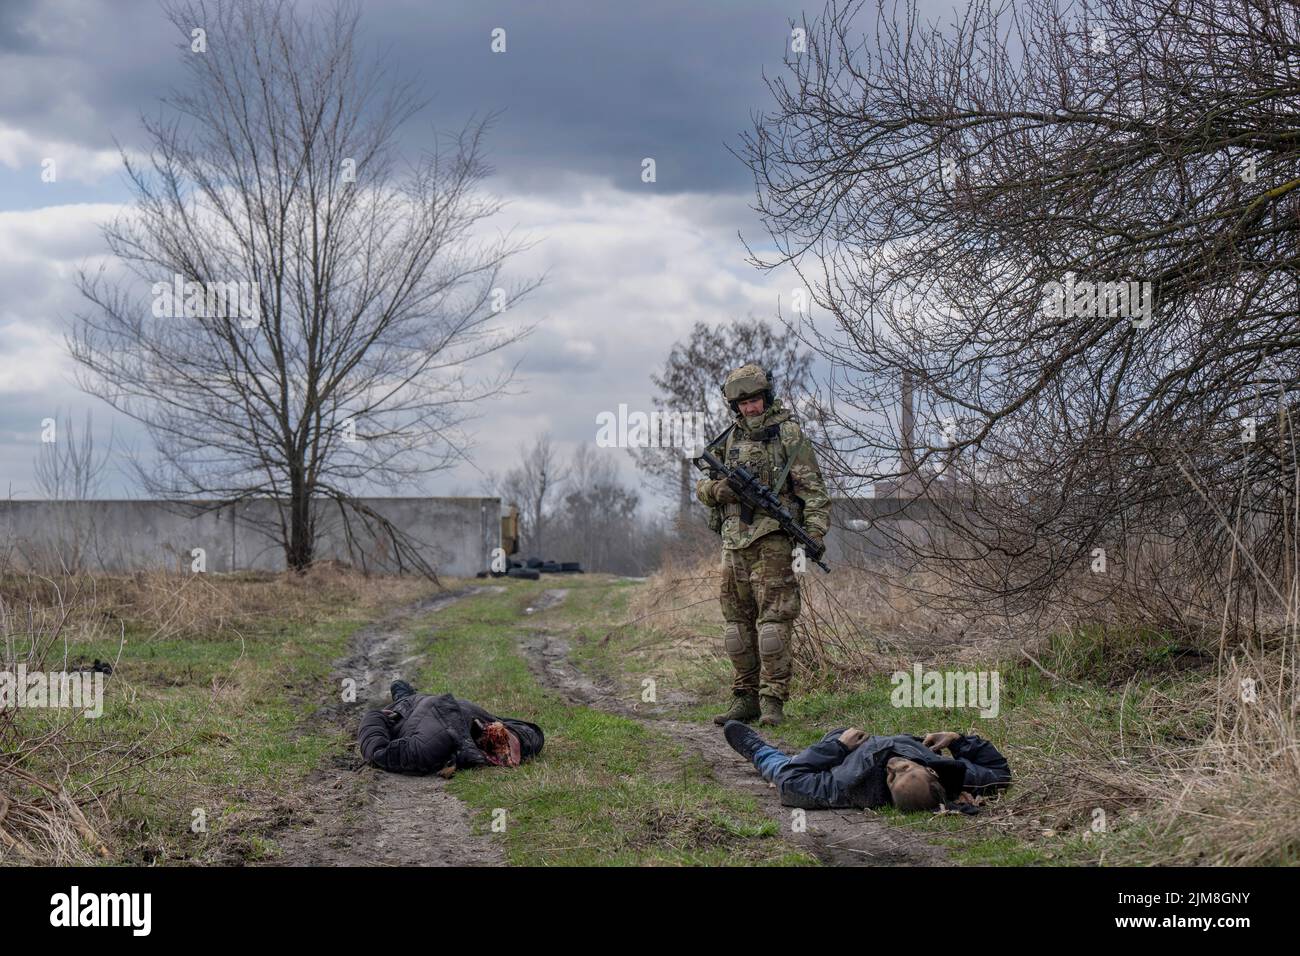 Bucha  Ukraine..  The town of Bucha in the Kyiv region which was recently liberated from the Russians Pic Shows Bodies lay around Bucha Stock Photo